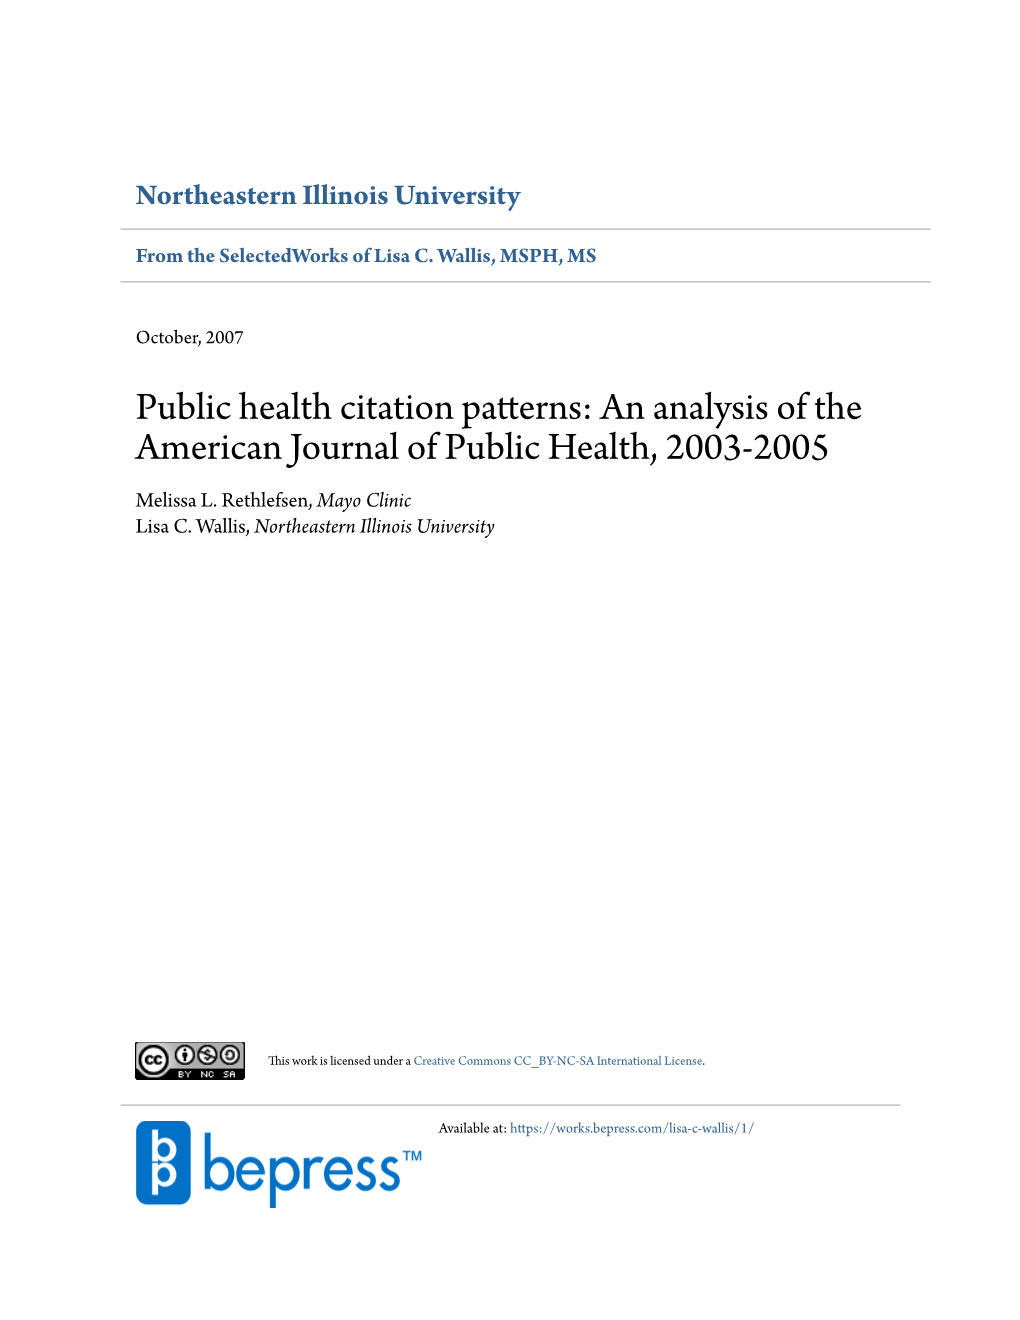 Public Health Citation Patterns: an Analysis of the American Journal of Public Health, 2003-2005 Melissa L